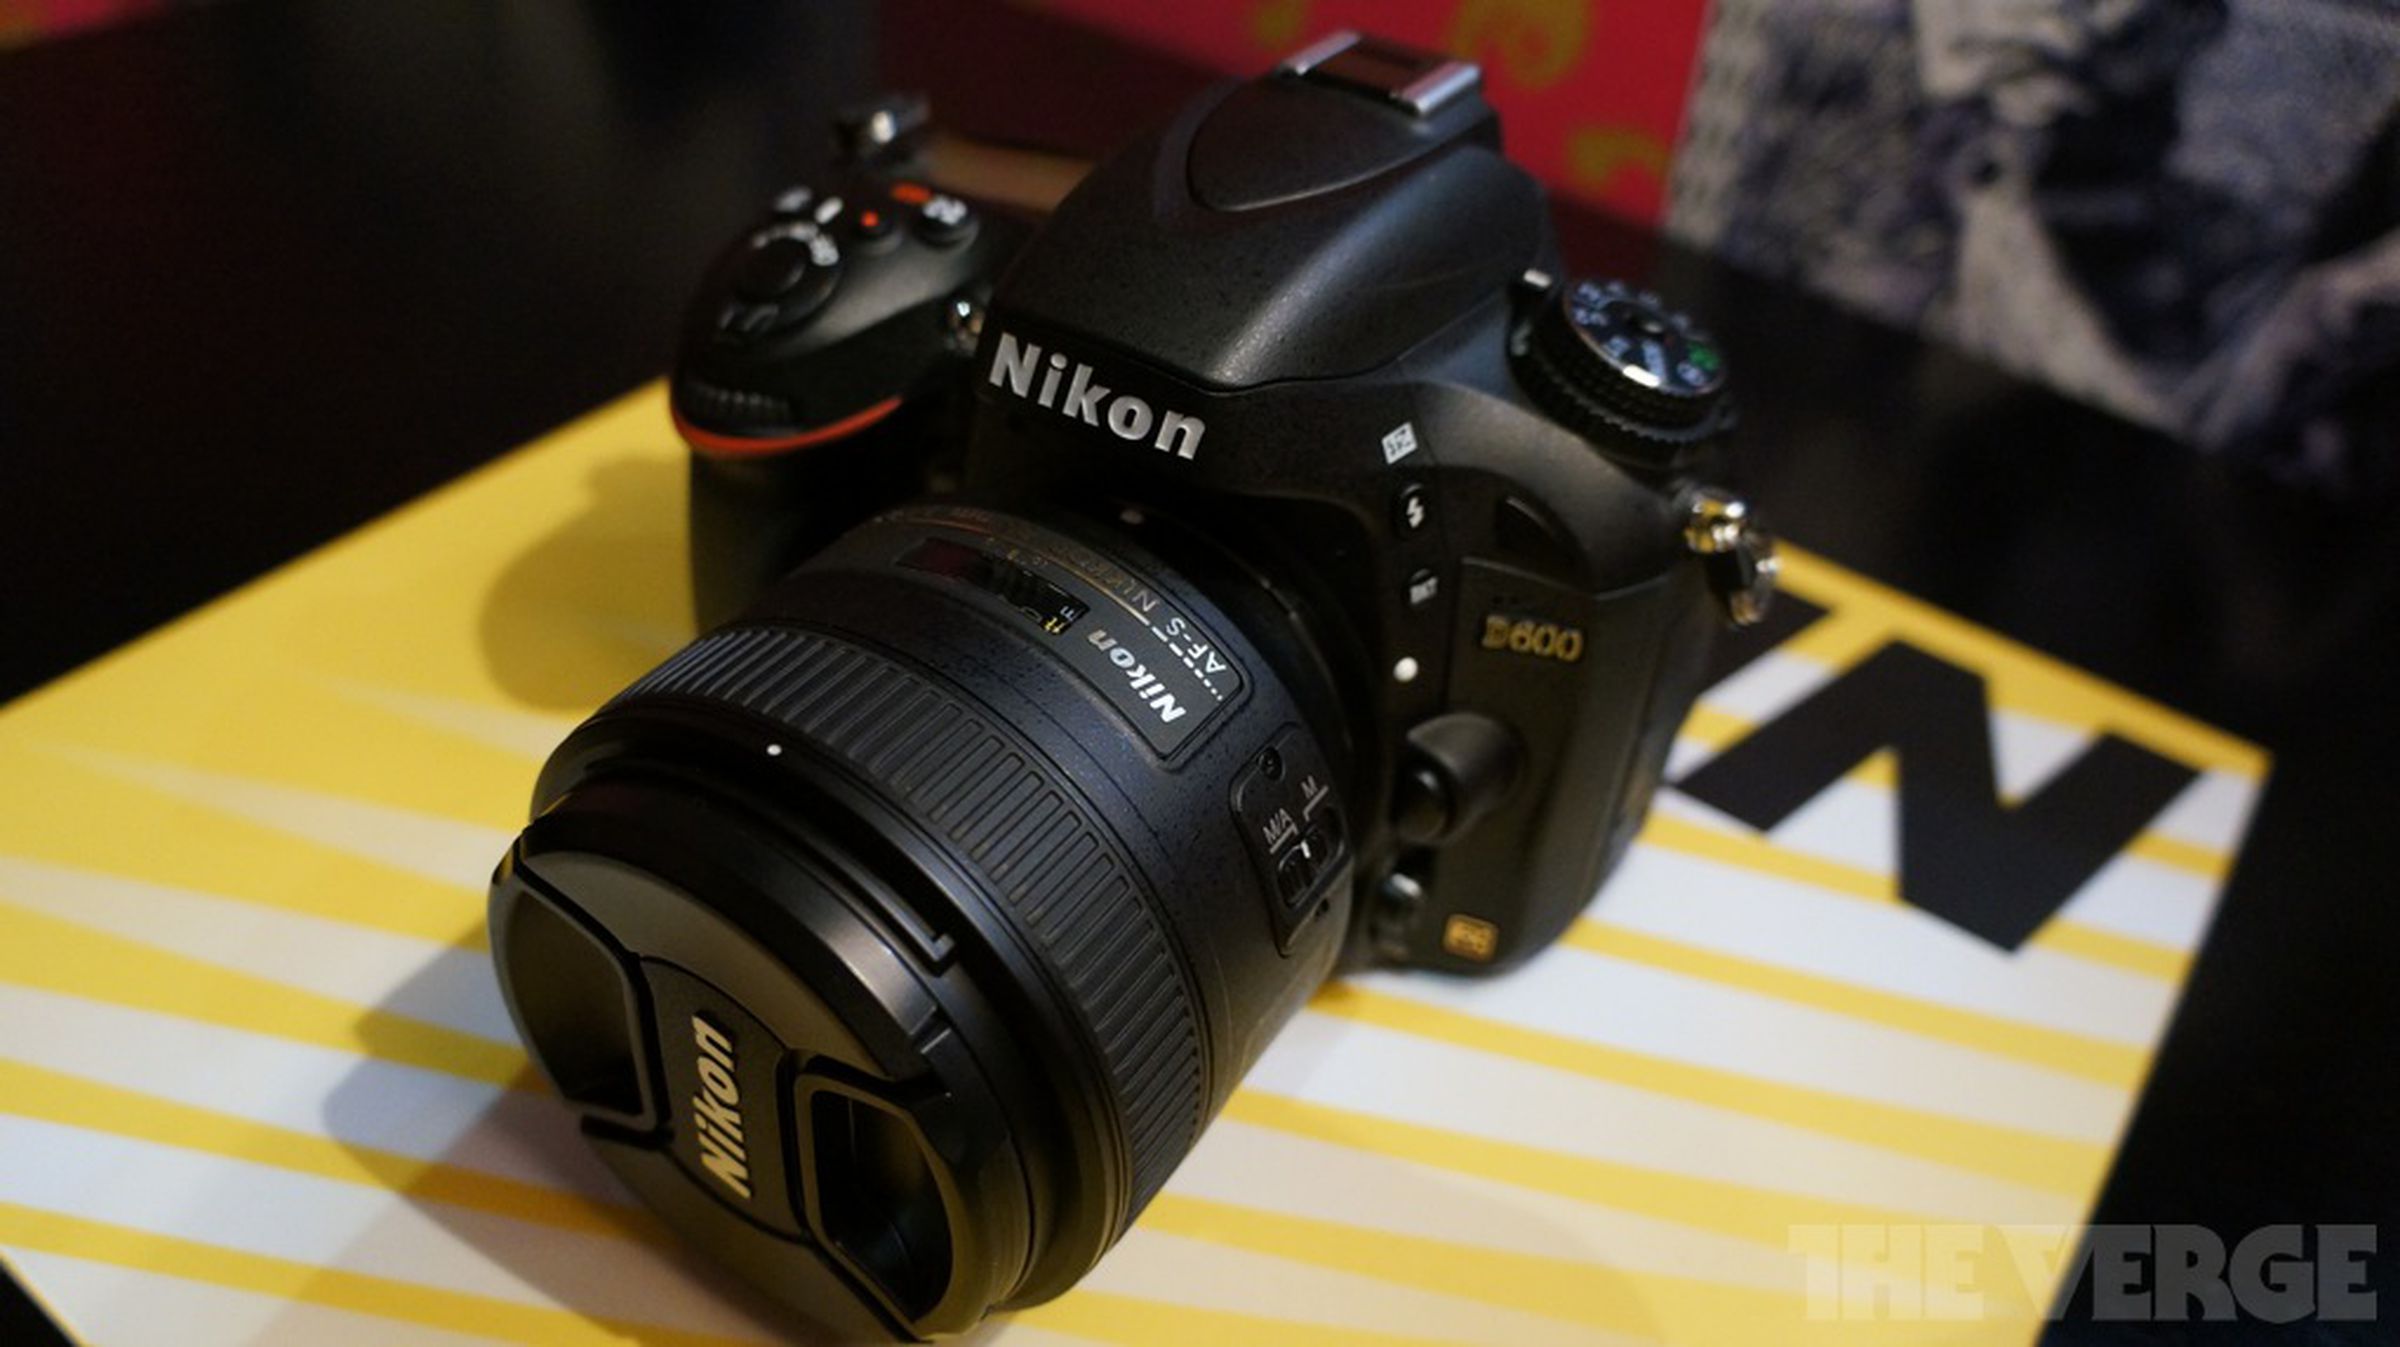 Nikon D600 hands-on pictures